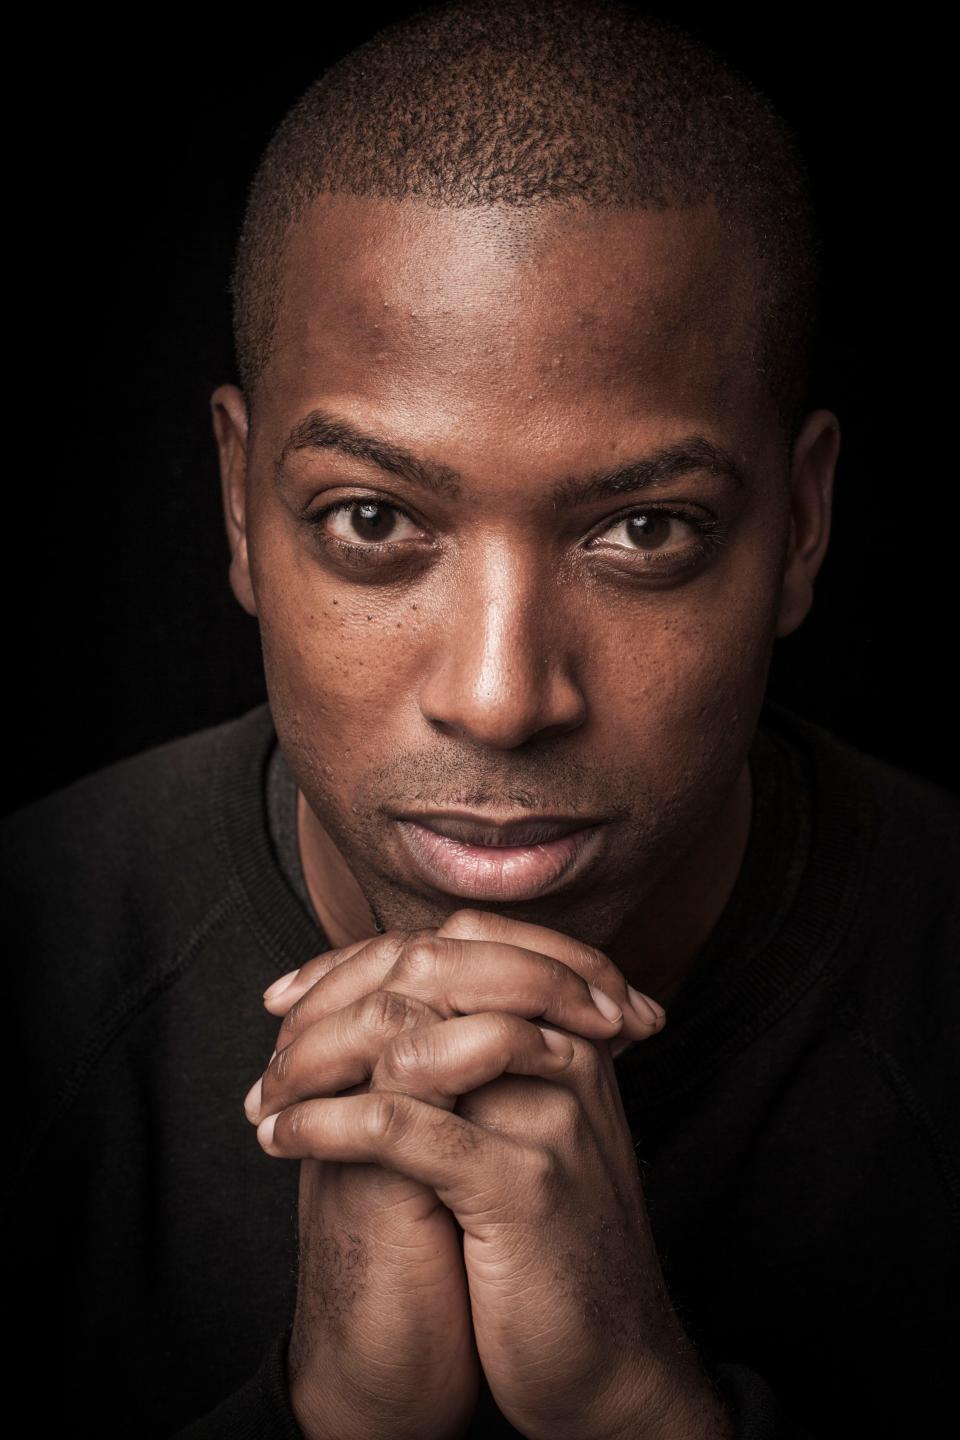 “What matters is sustained action,” says Tristan Walker, CEO of Walker & Co. Brands, a majority-minority-led company acquired by Procter & Gamble in 2018.